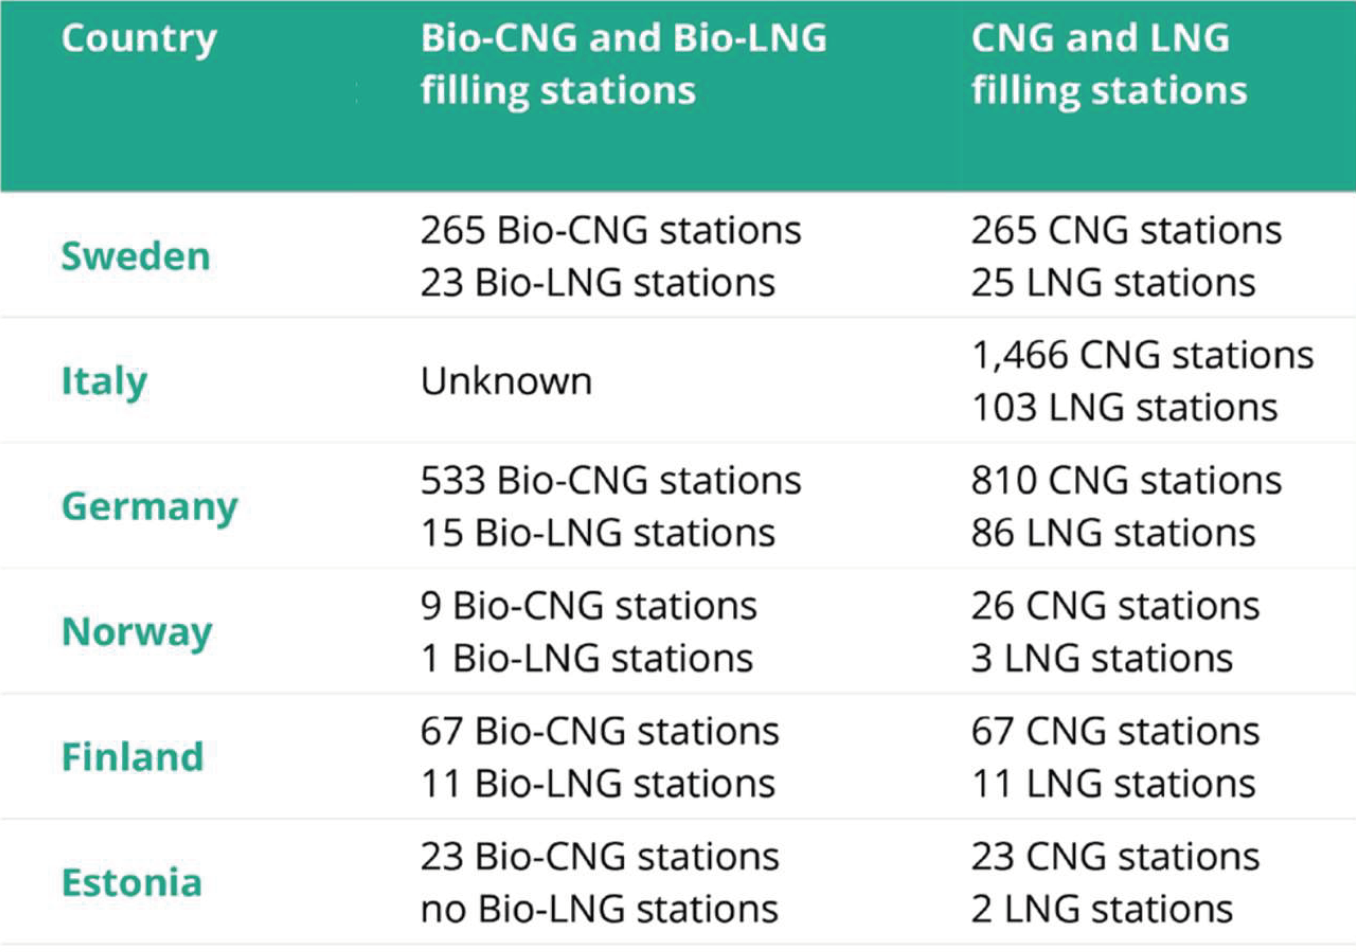 Bio-CNG and Bio-LNG infrastructure